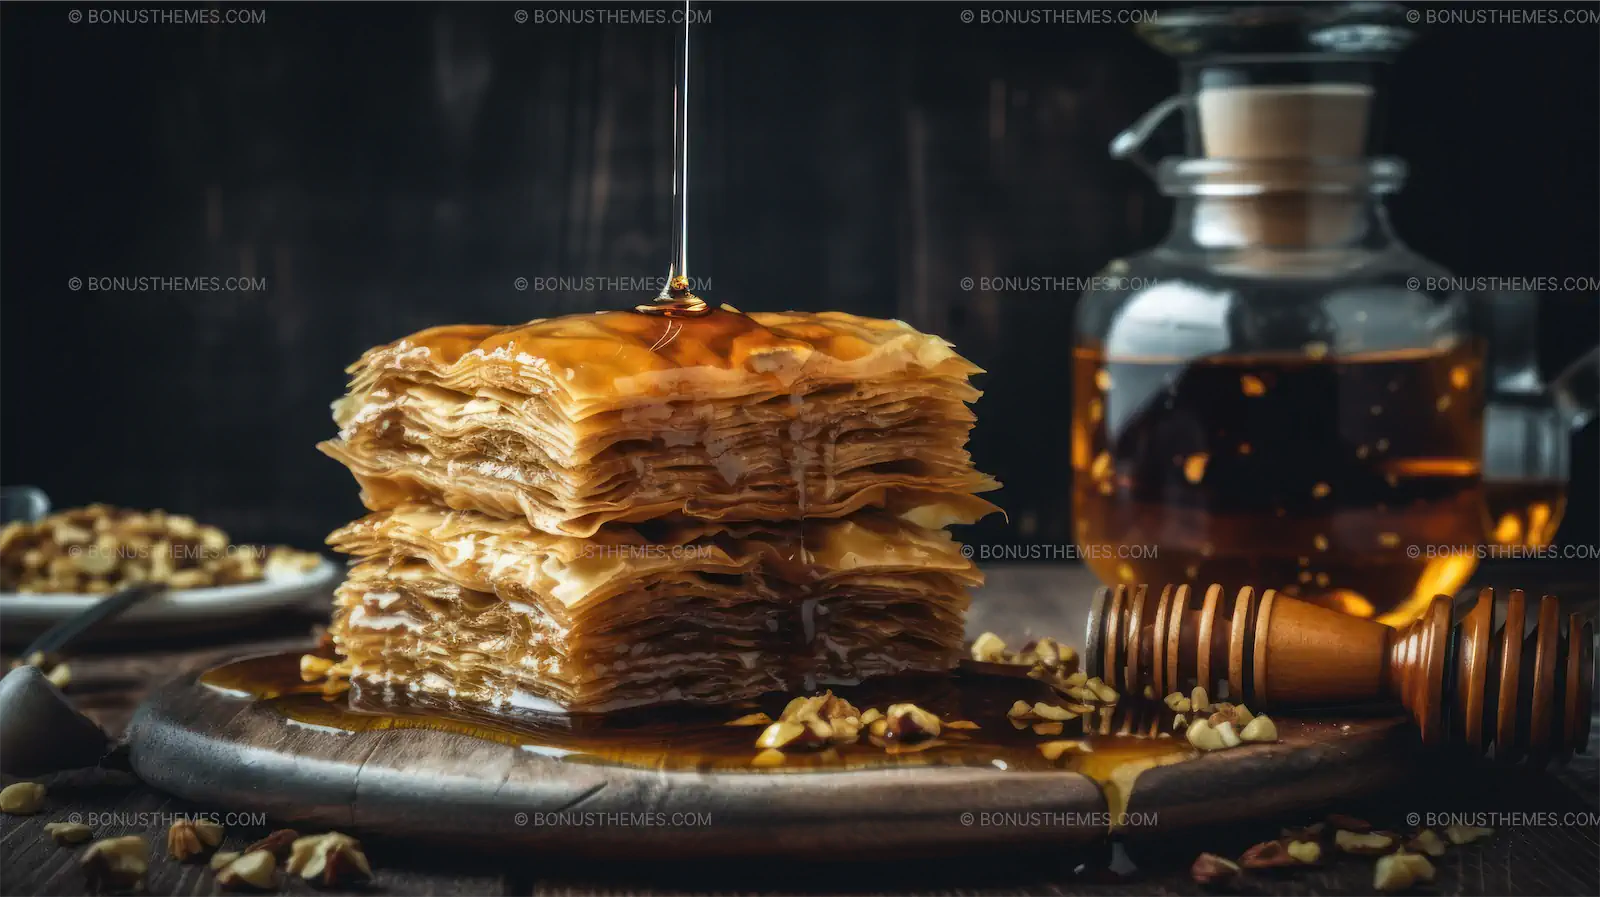 Two stacks of baklava sweet on a wooden plate